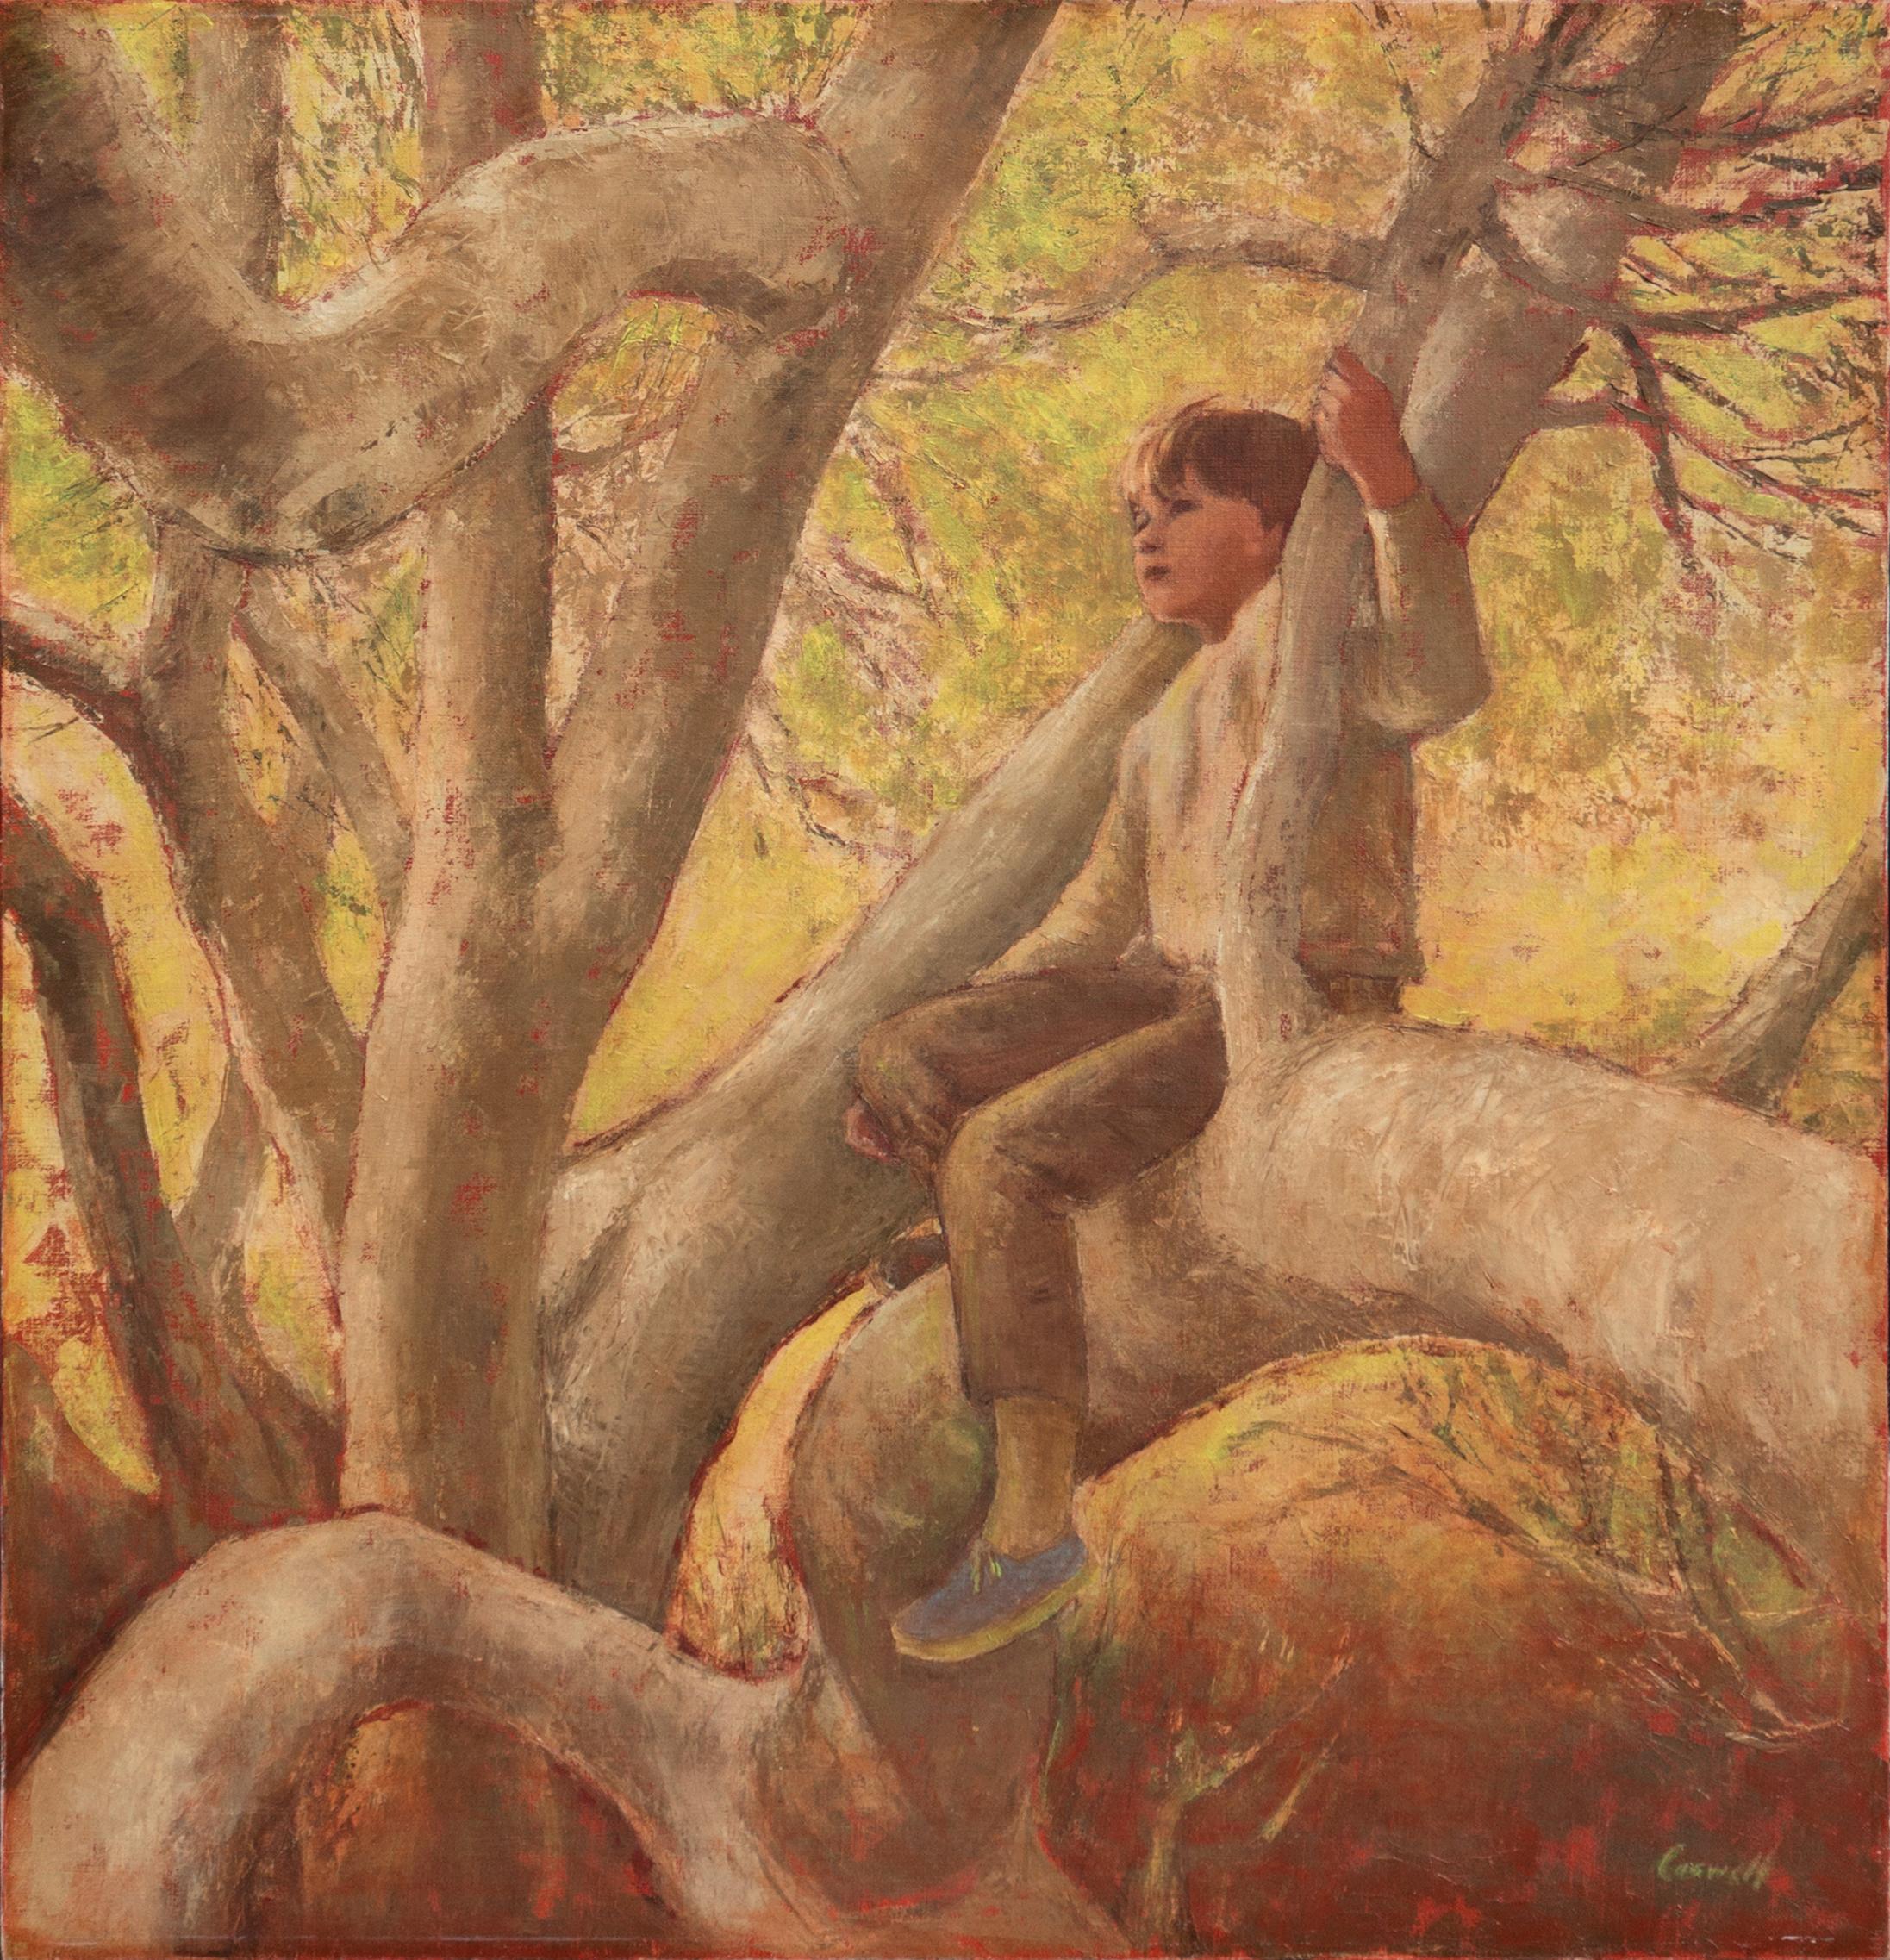 Helen Rayburn Caswell Portrait Painting - 'In the Sycamore', Large Figural Oil, Carmel, California Woman Artist, Muralist 